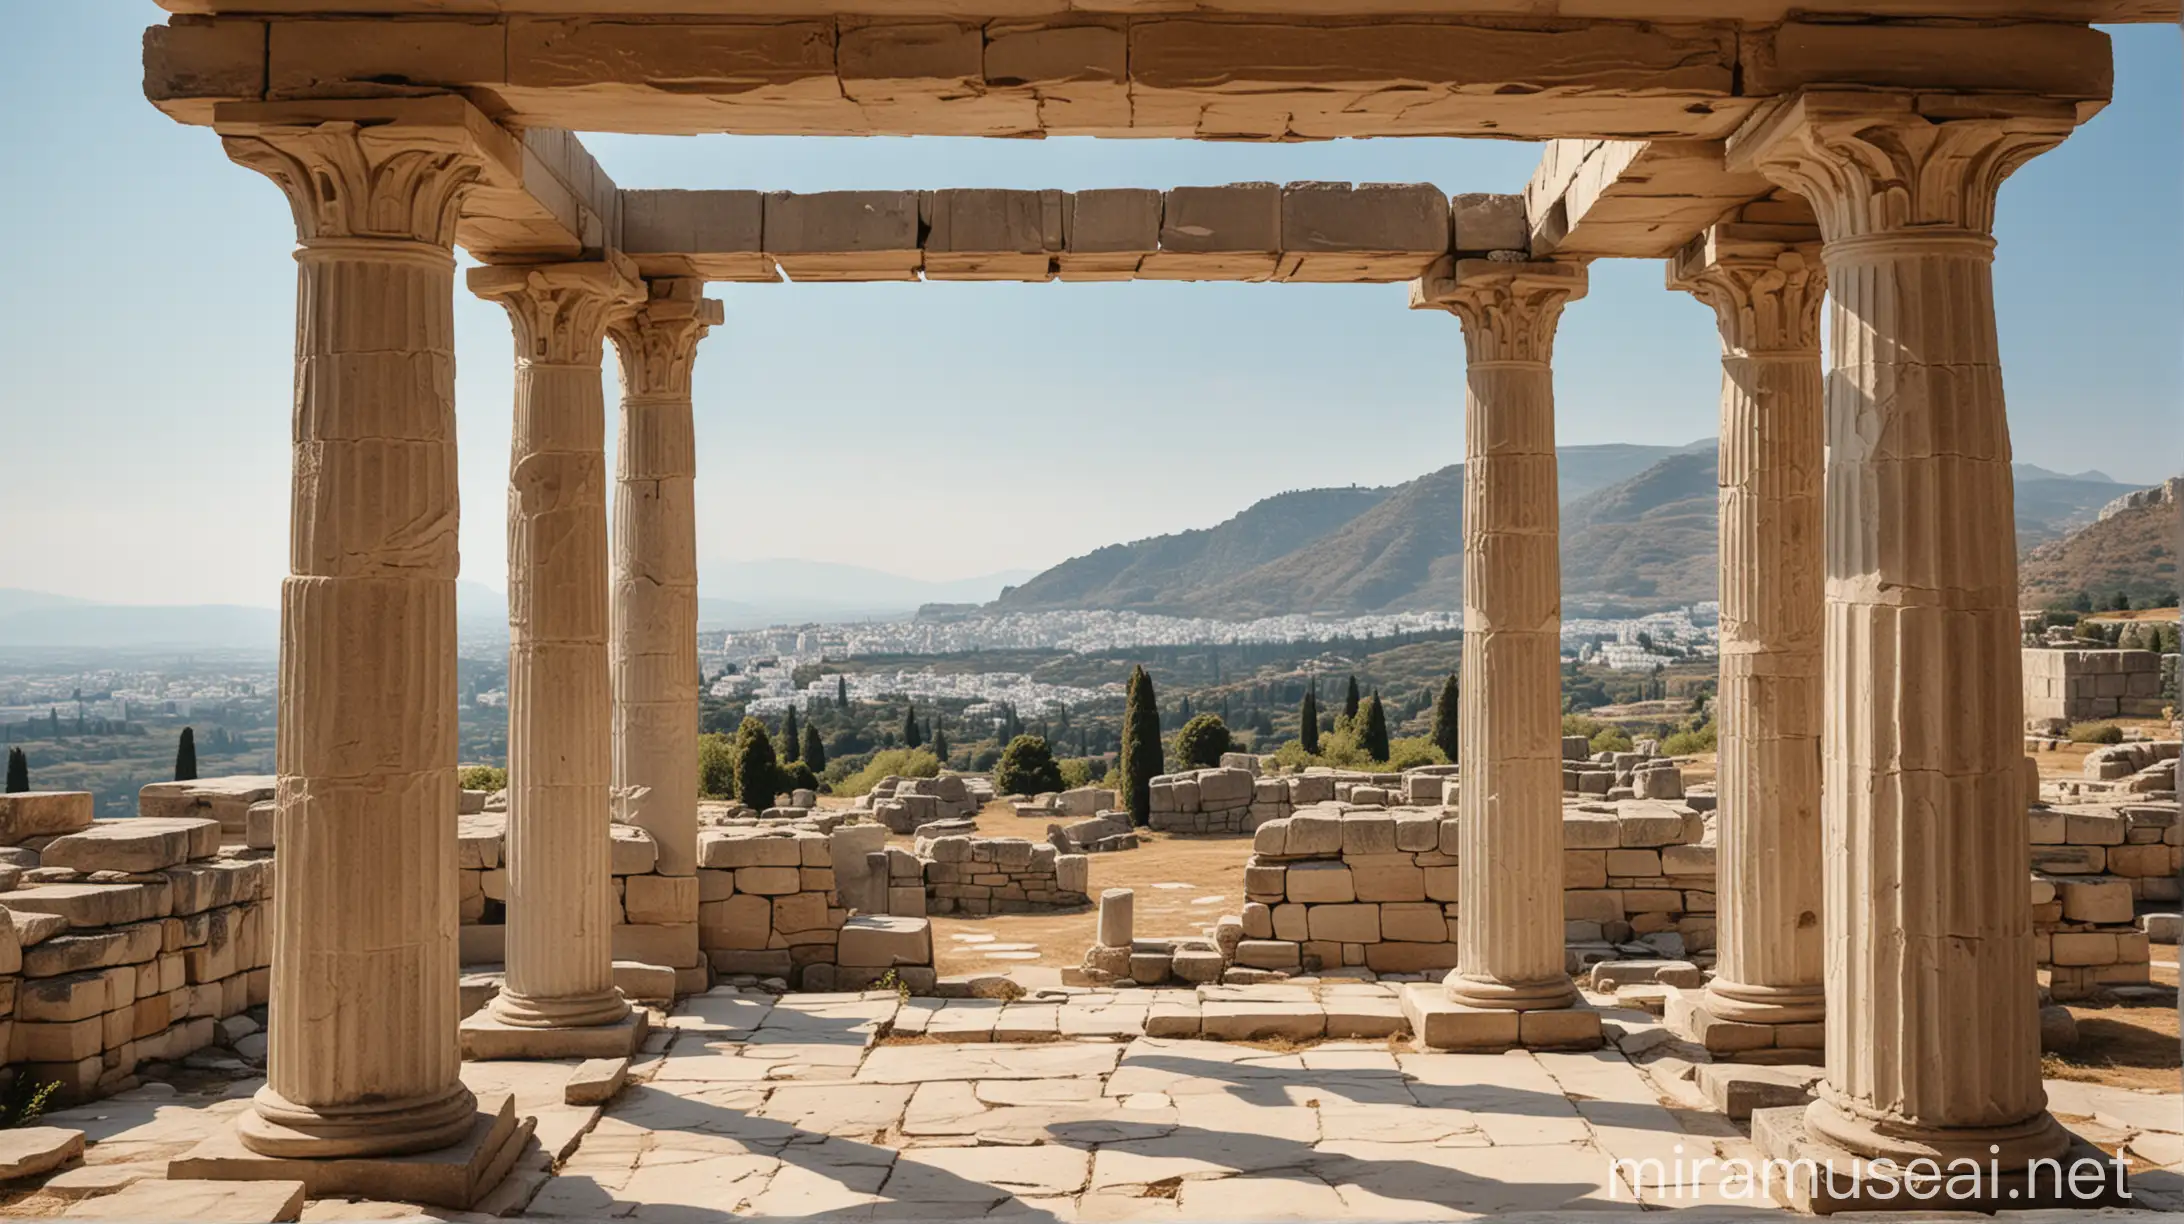 in the Greek temple there are three Greek columns connected to each other by a lintel. in the background is a landscape on a sunny day